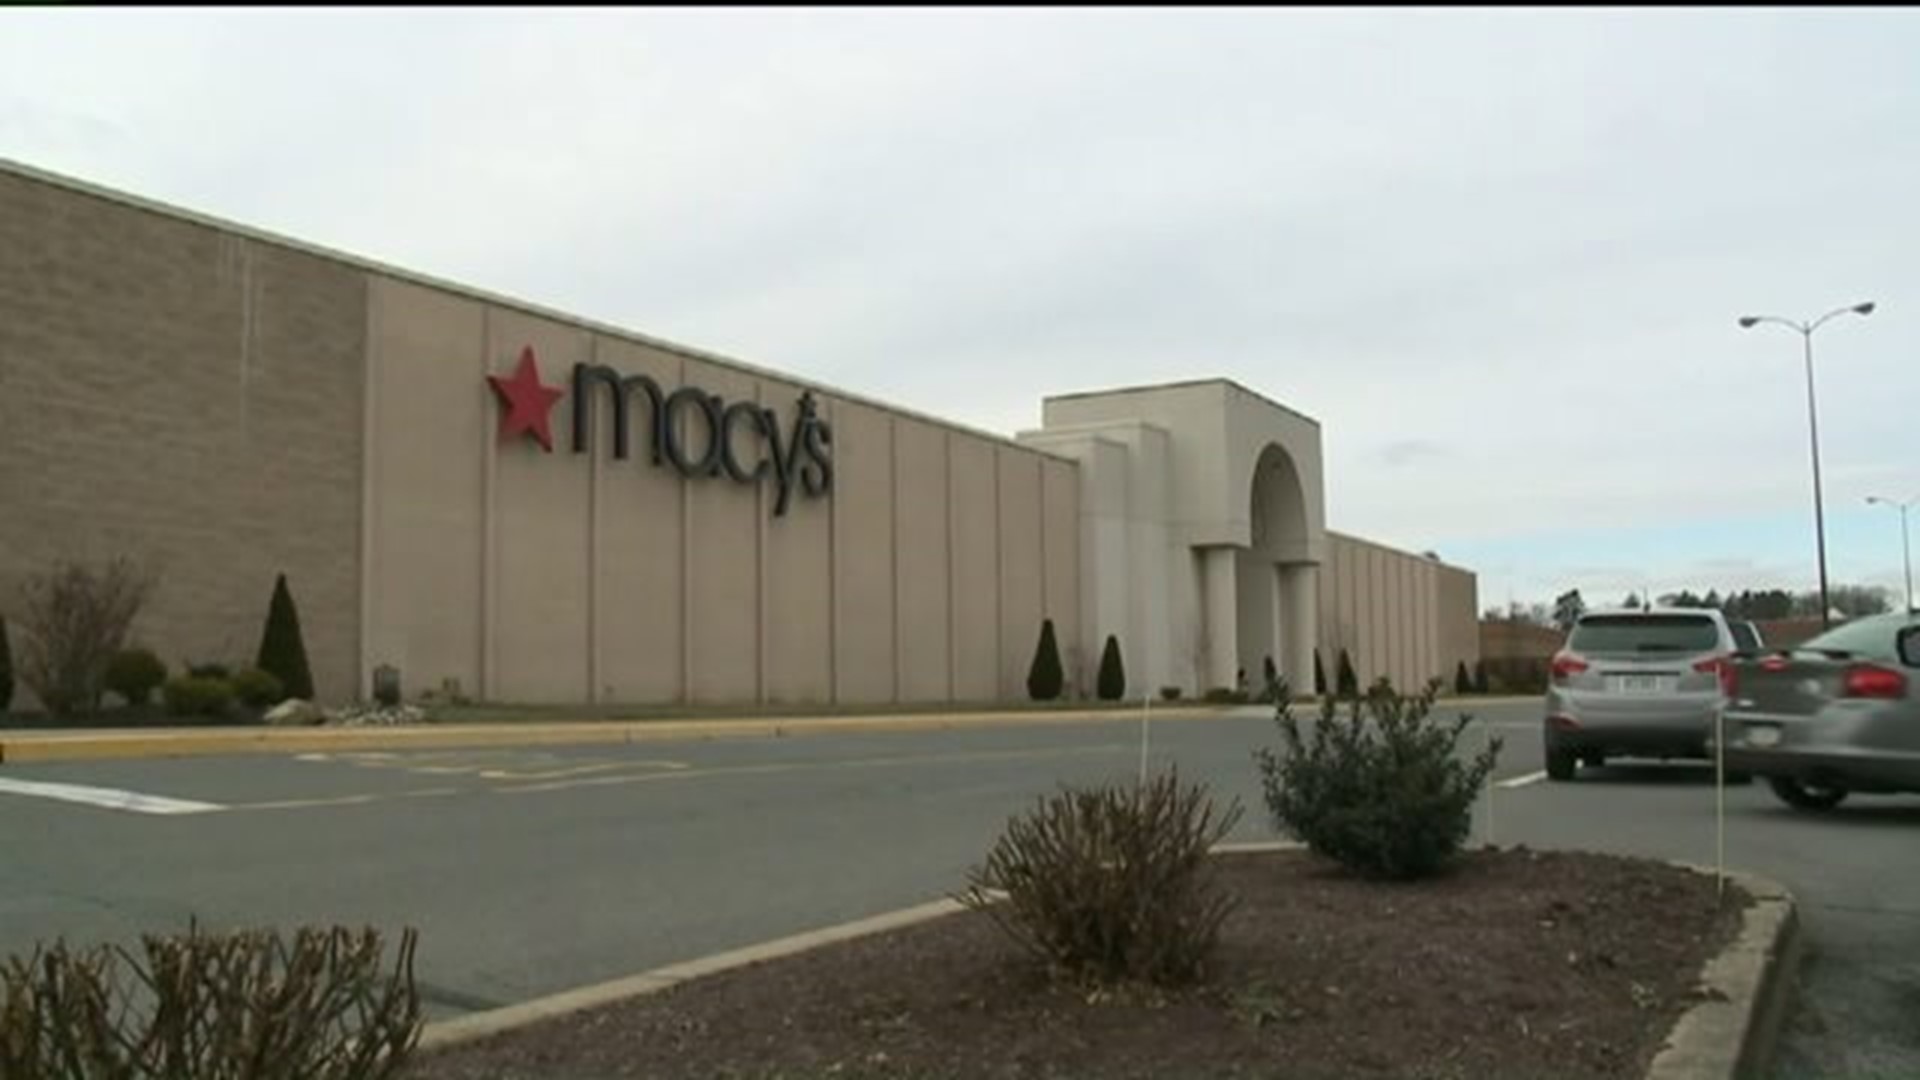 Shoppers Concerned as Anchor Stores Close in Local Malls